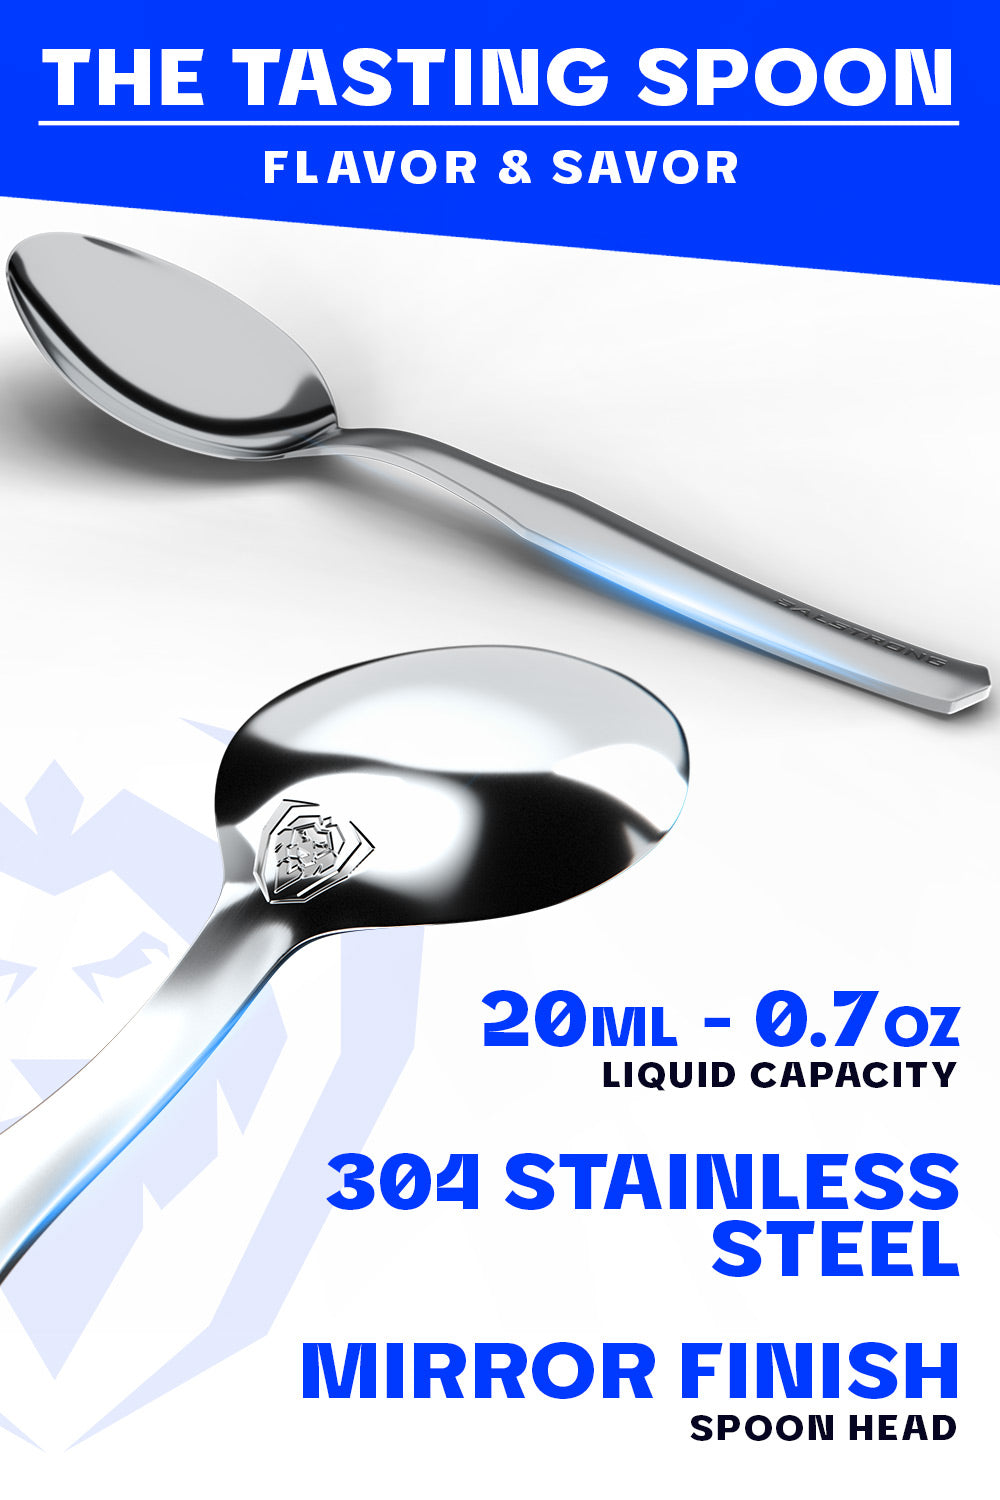 Dalstrong professional chef tasting and plating spoon featuring it's stainless steel and mirror finish spoon head.